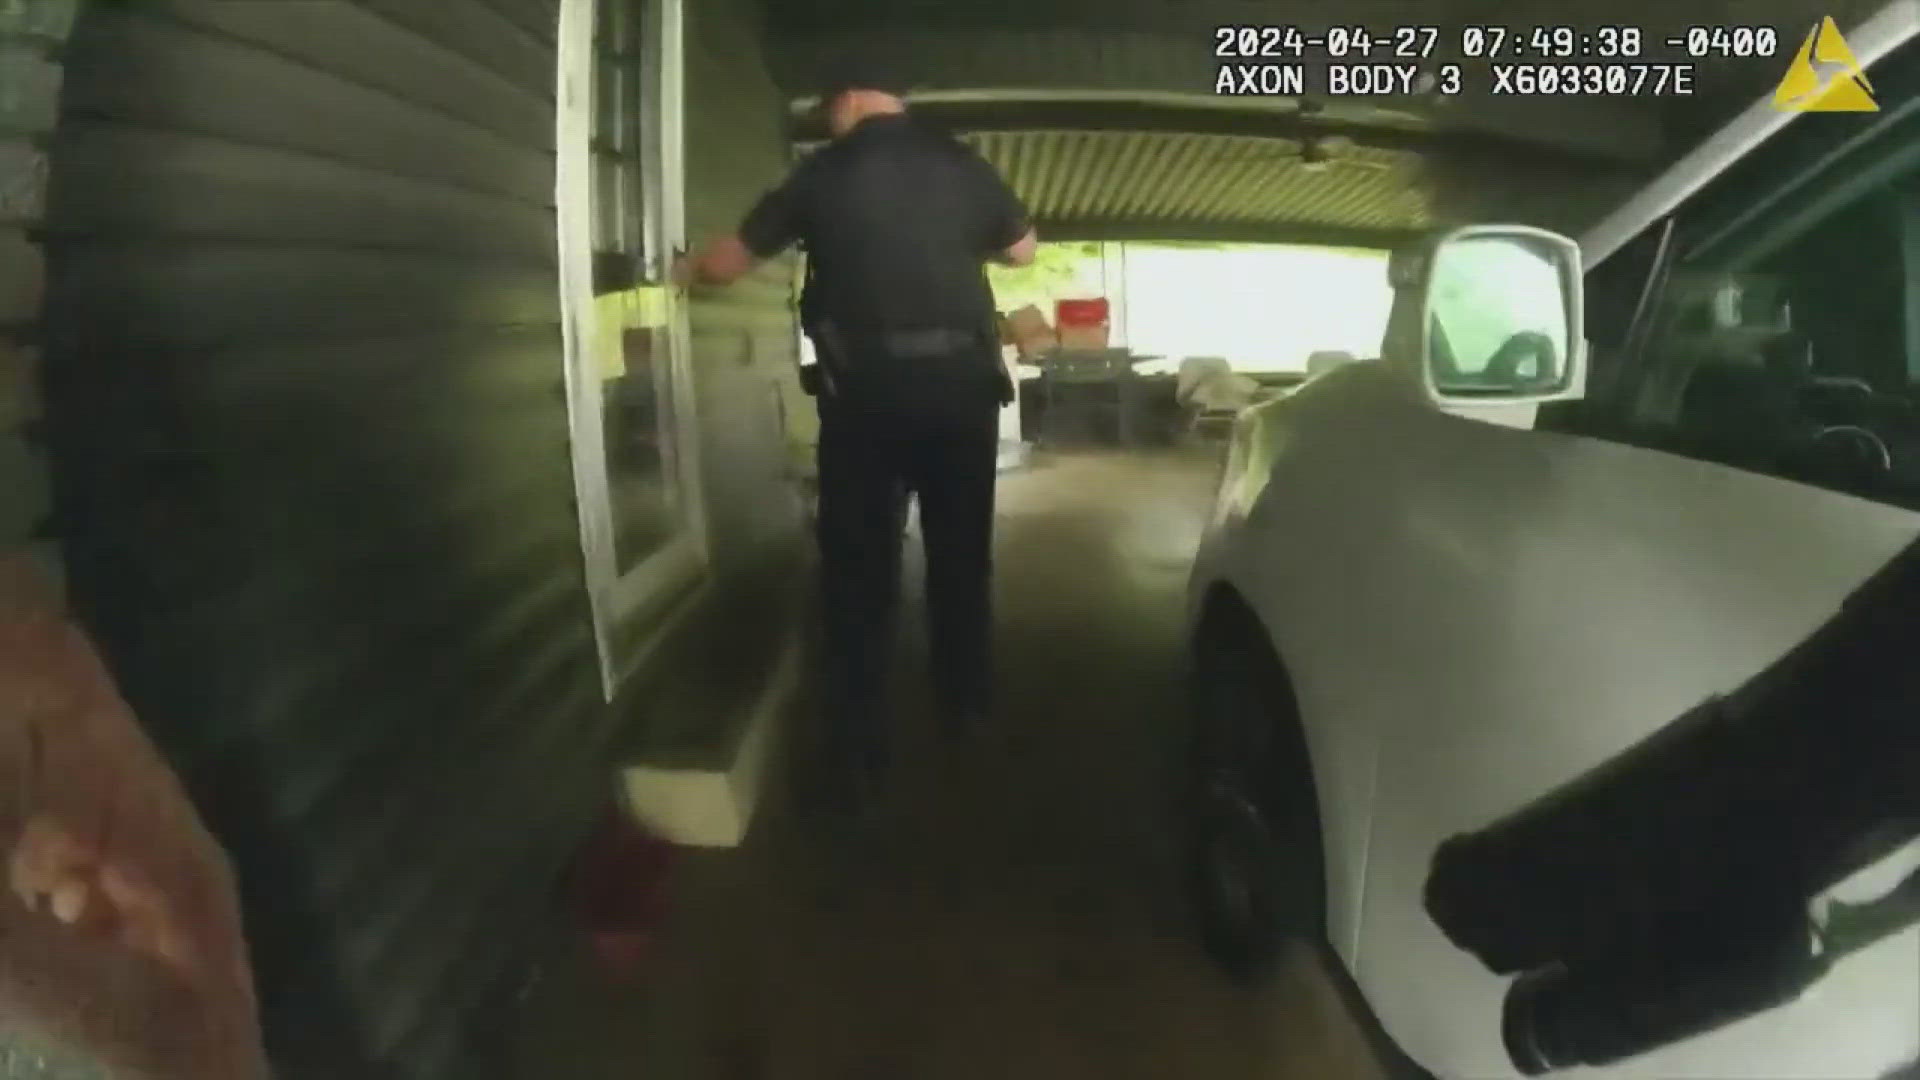 Knoxville Police have released body camera video of two officers who shot and killed a man.